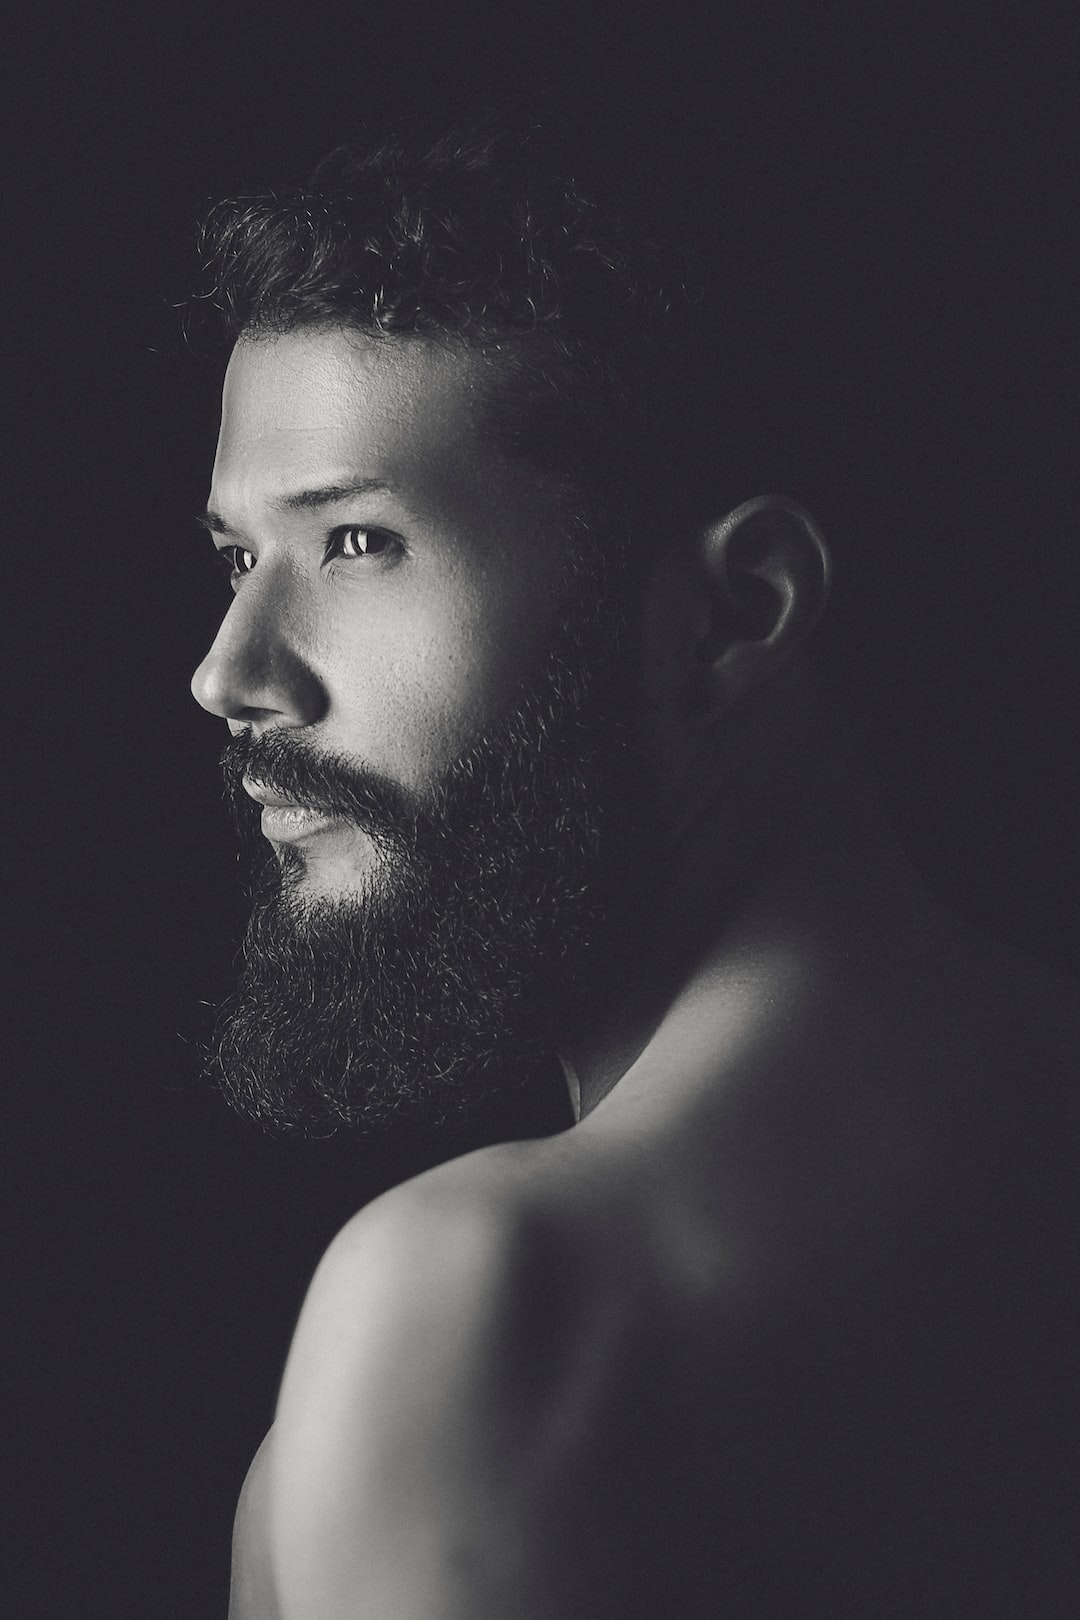 Beard Health Matters: Why Taking Care of Your Beard is Essential for Overall Wellness